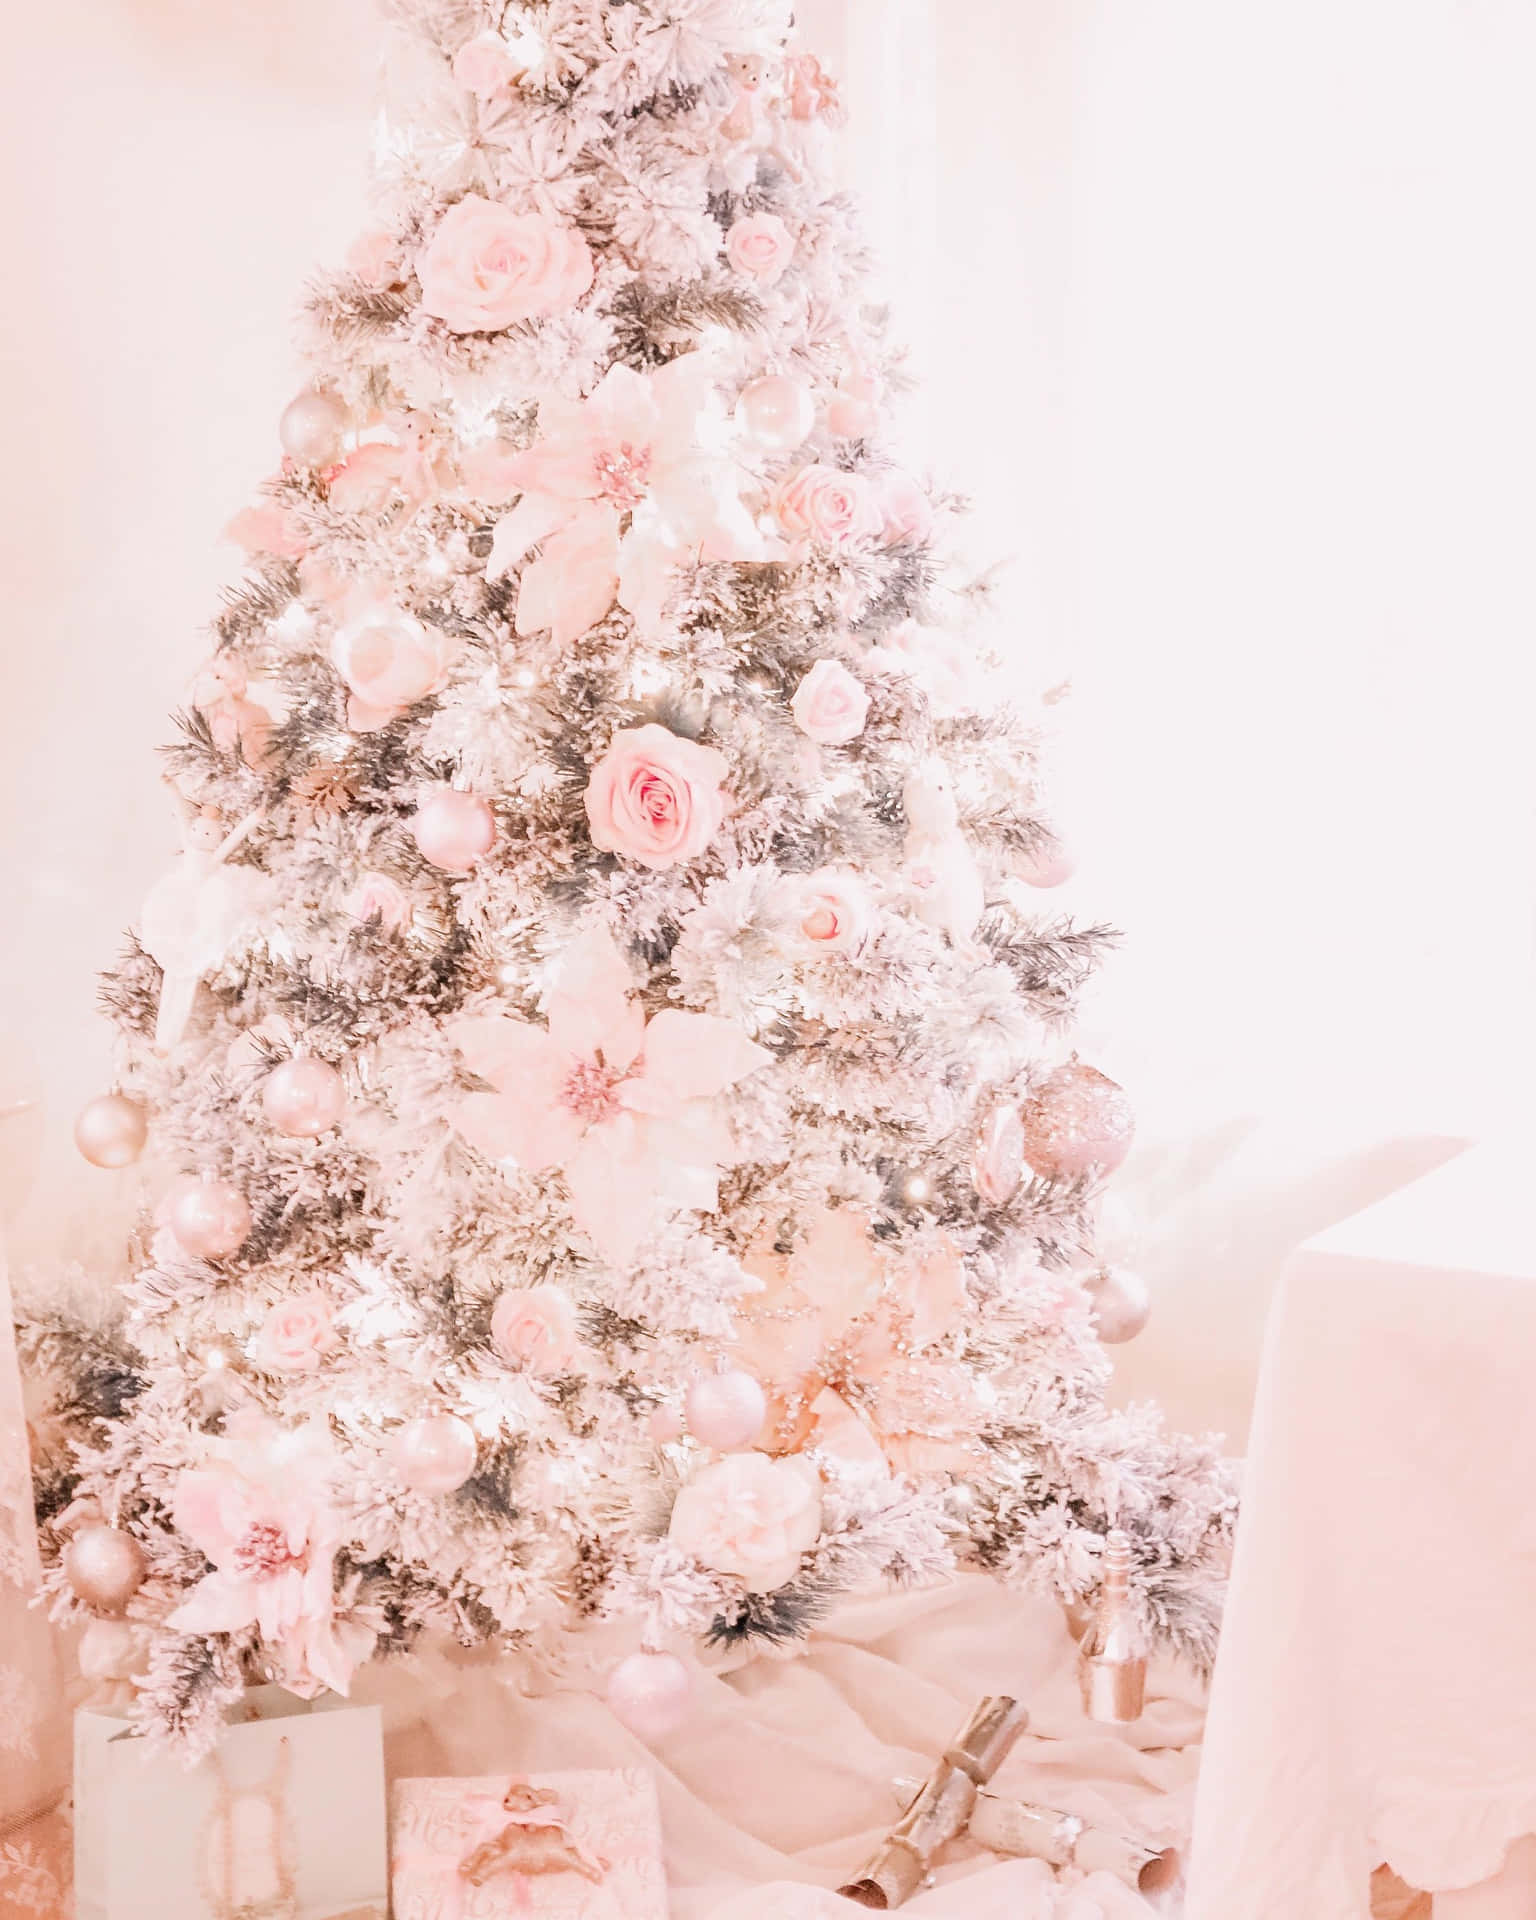 Download Brighten Up Your Festive Season With This Sweet Pink Christmas ...